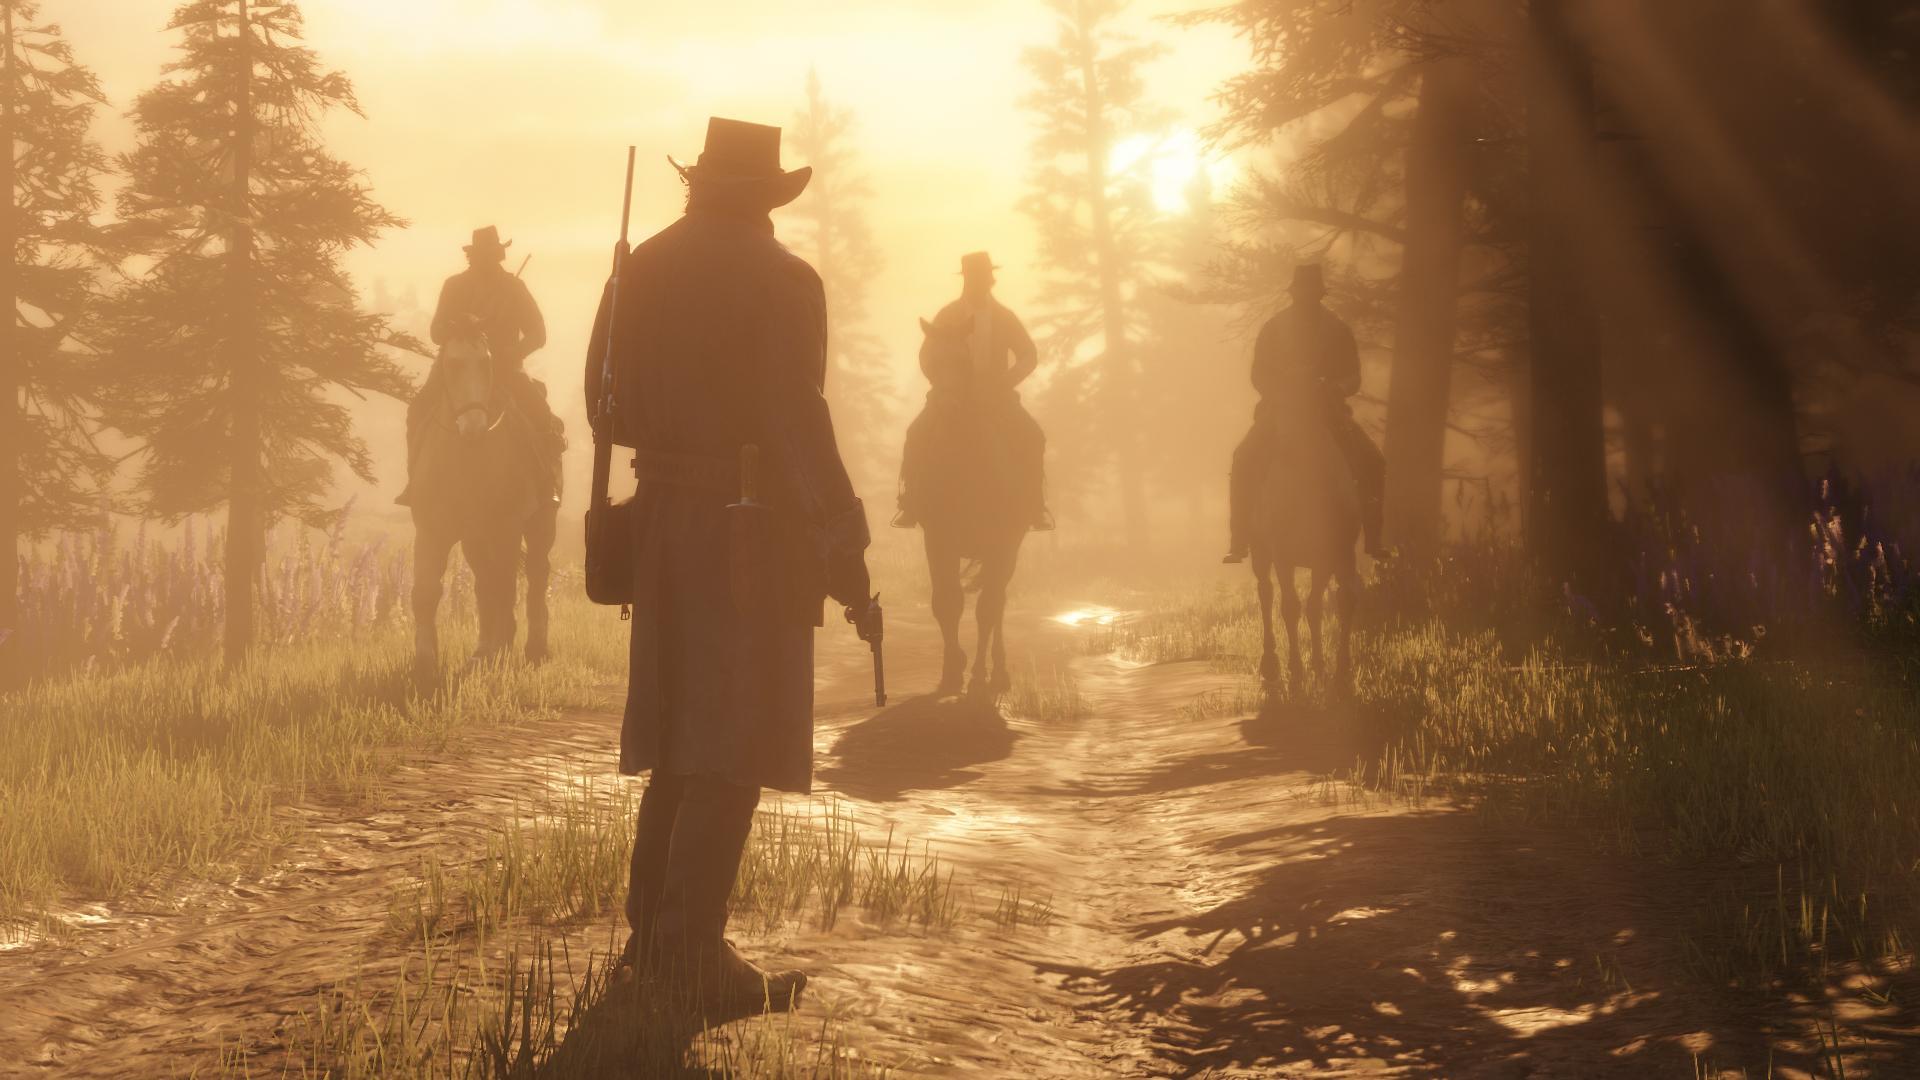 Call of Duty: Black Ops 4' Is Scared Of 'Red Dead Redemption 2'